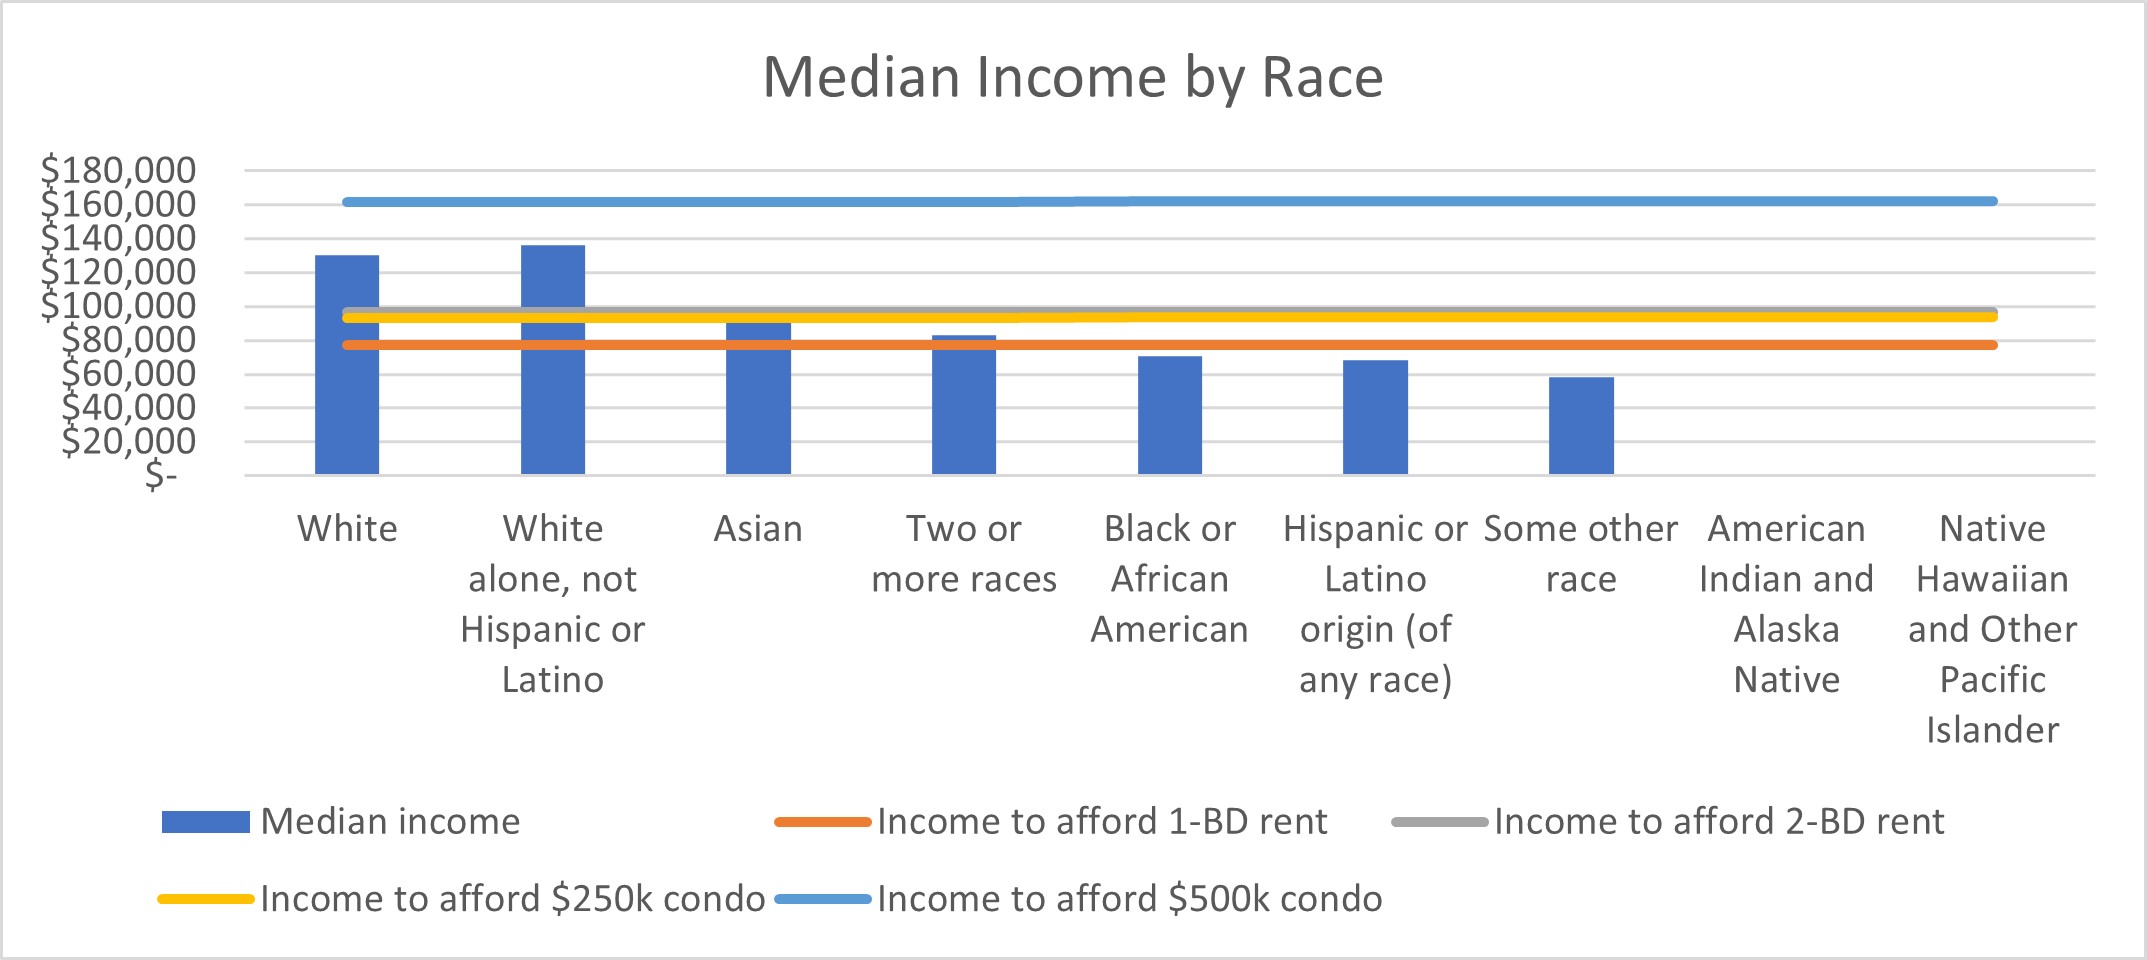 Z4H Median Income by Race